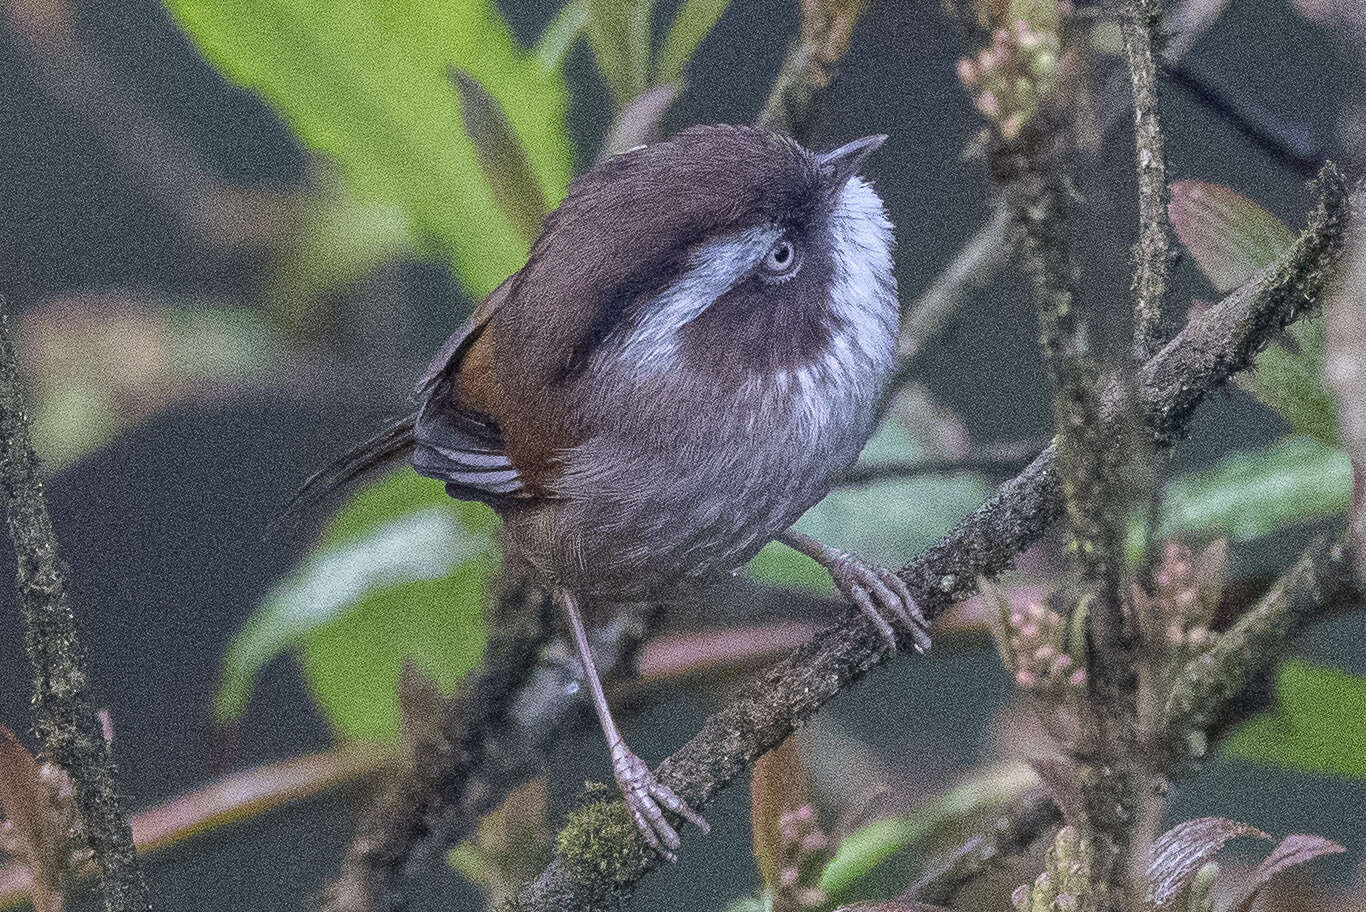 Image of White-browed Fulvetta